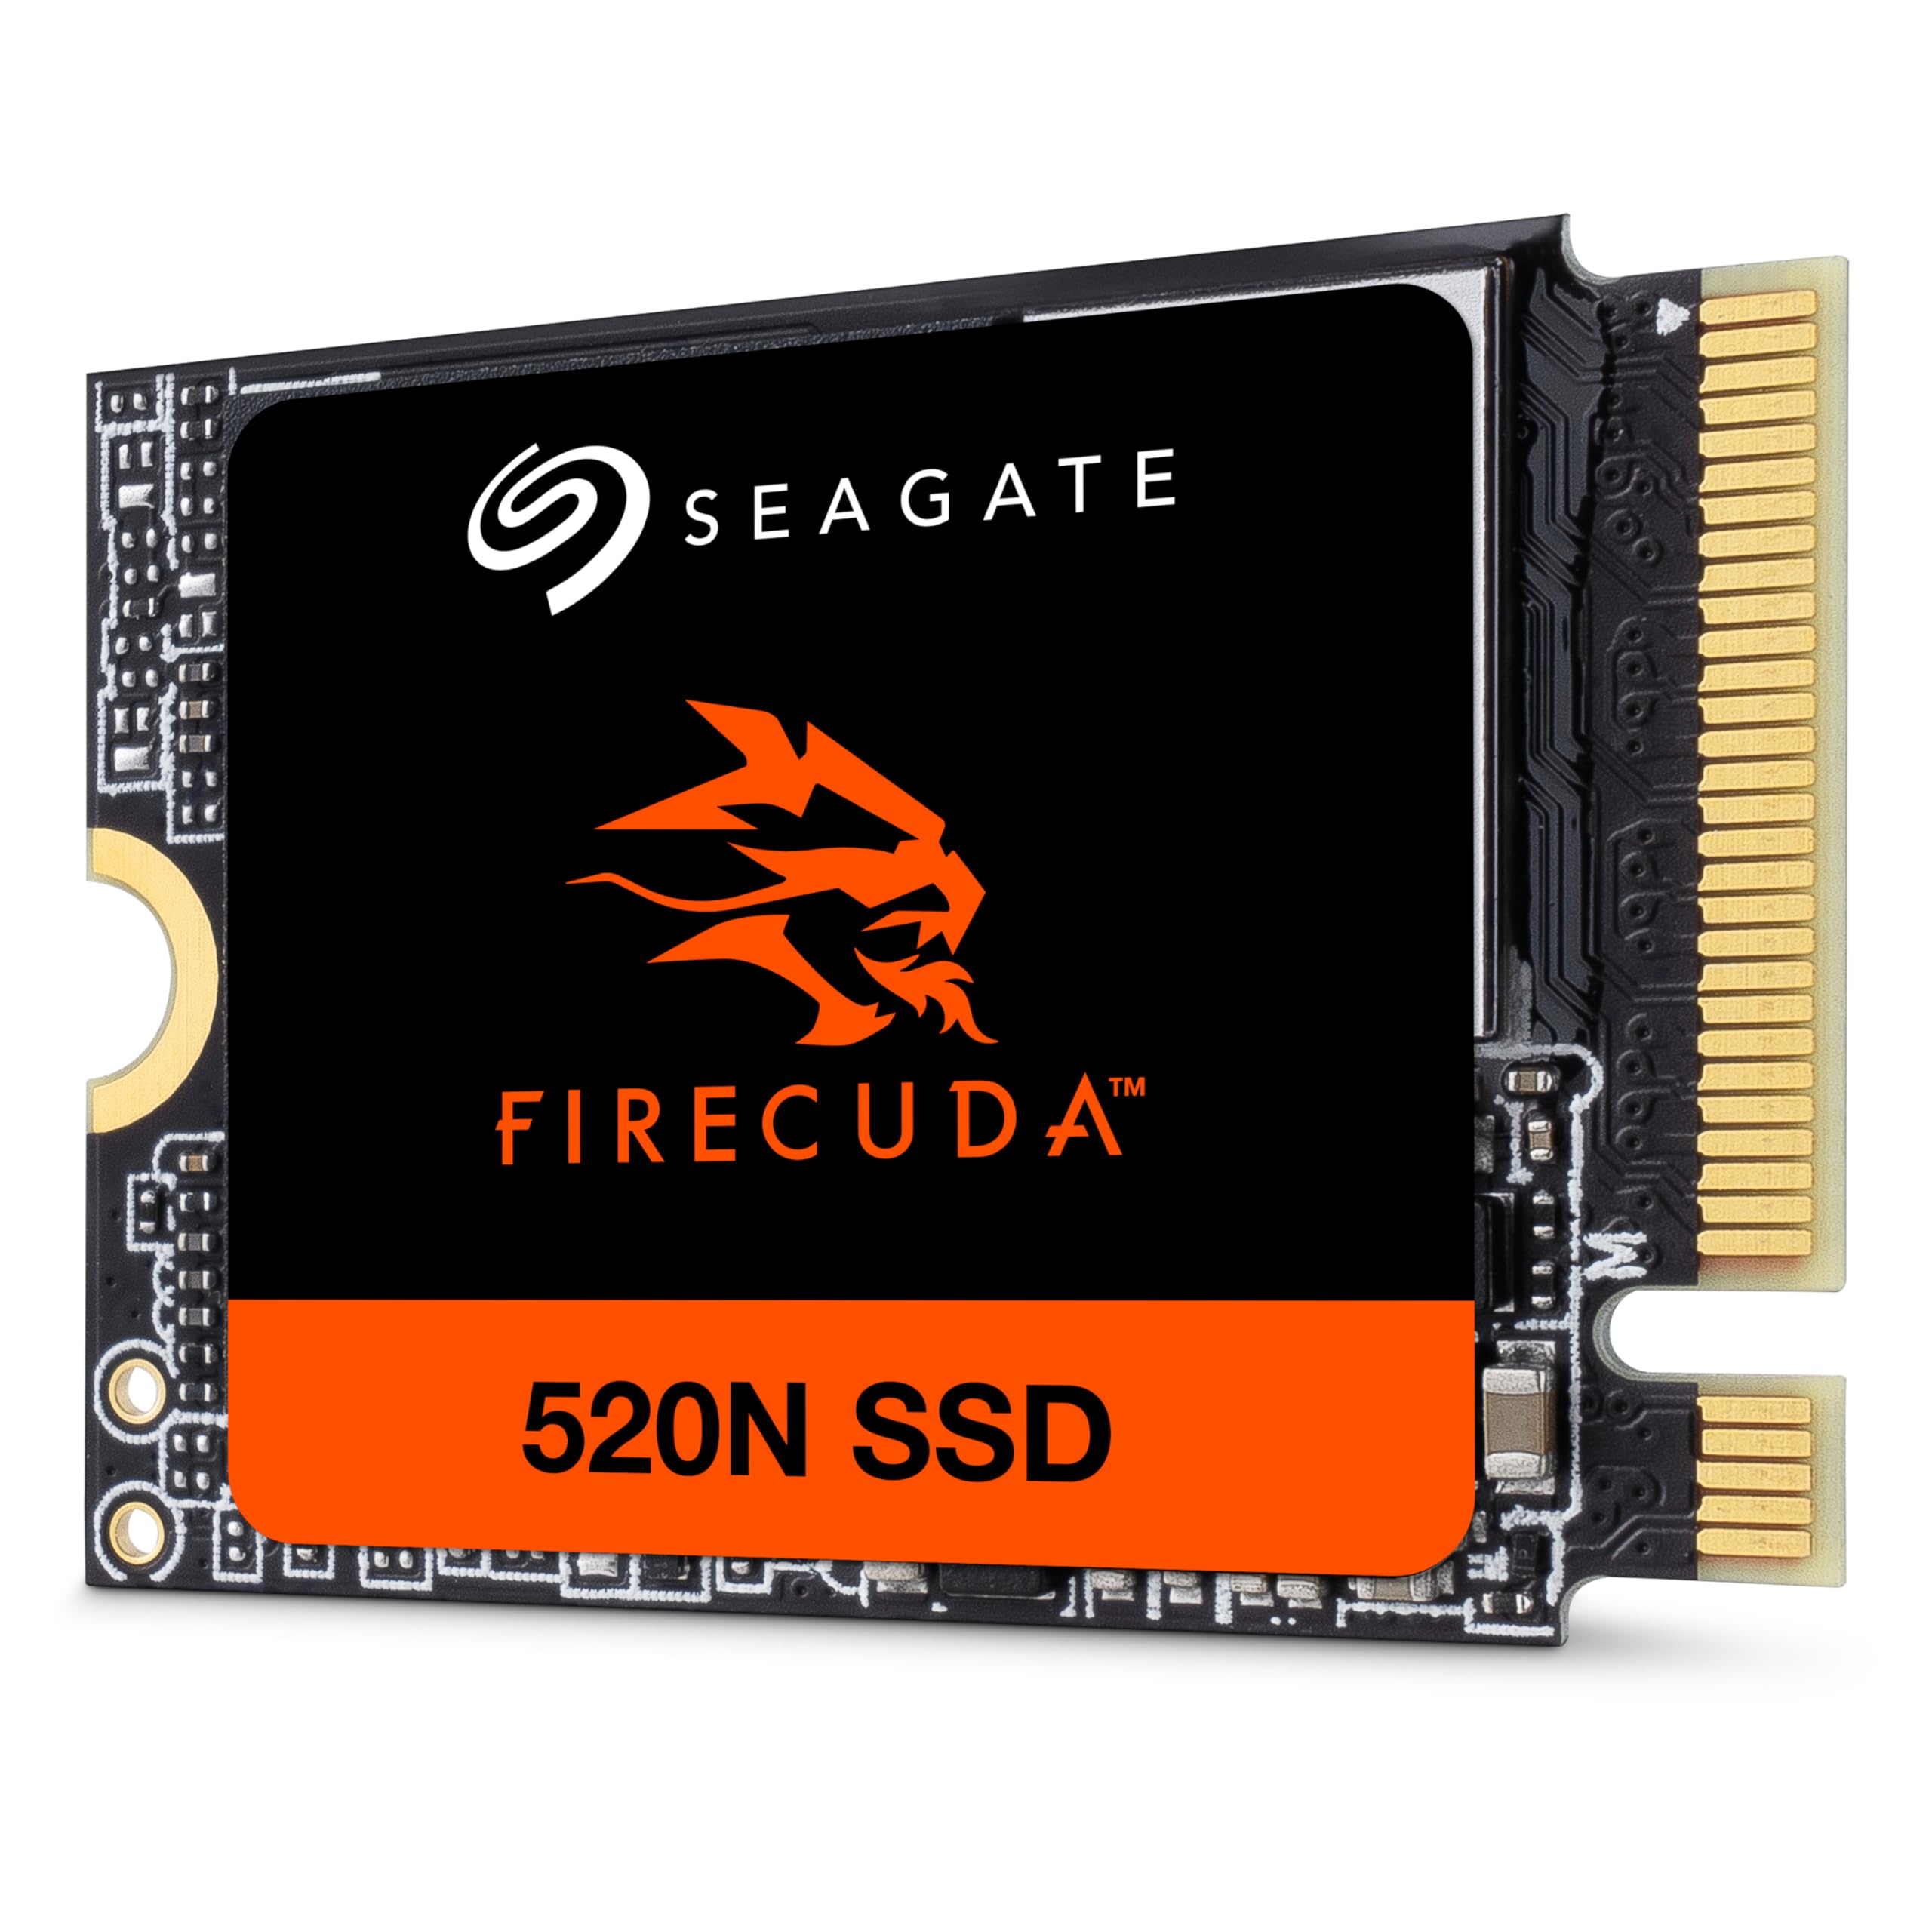 Seagate FireCuda 520N SSD 2TB SSD - M.2 2230-S2, PCIe Gen4 ×4 NVMe 1.4, speeds up to 5000MB/s, compatible with Steam Deck, Microsoft® Surface, laptop, with Rescue Services (ZP2048GV3A002)